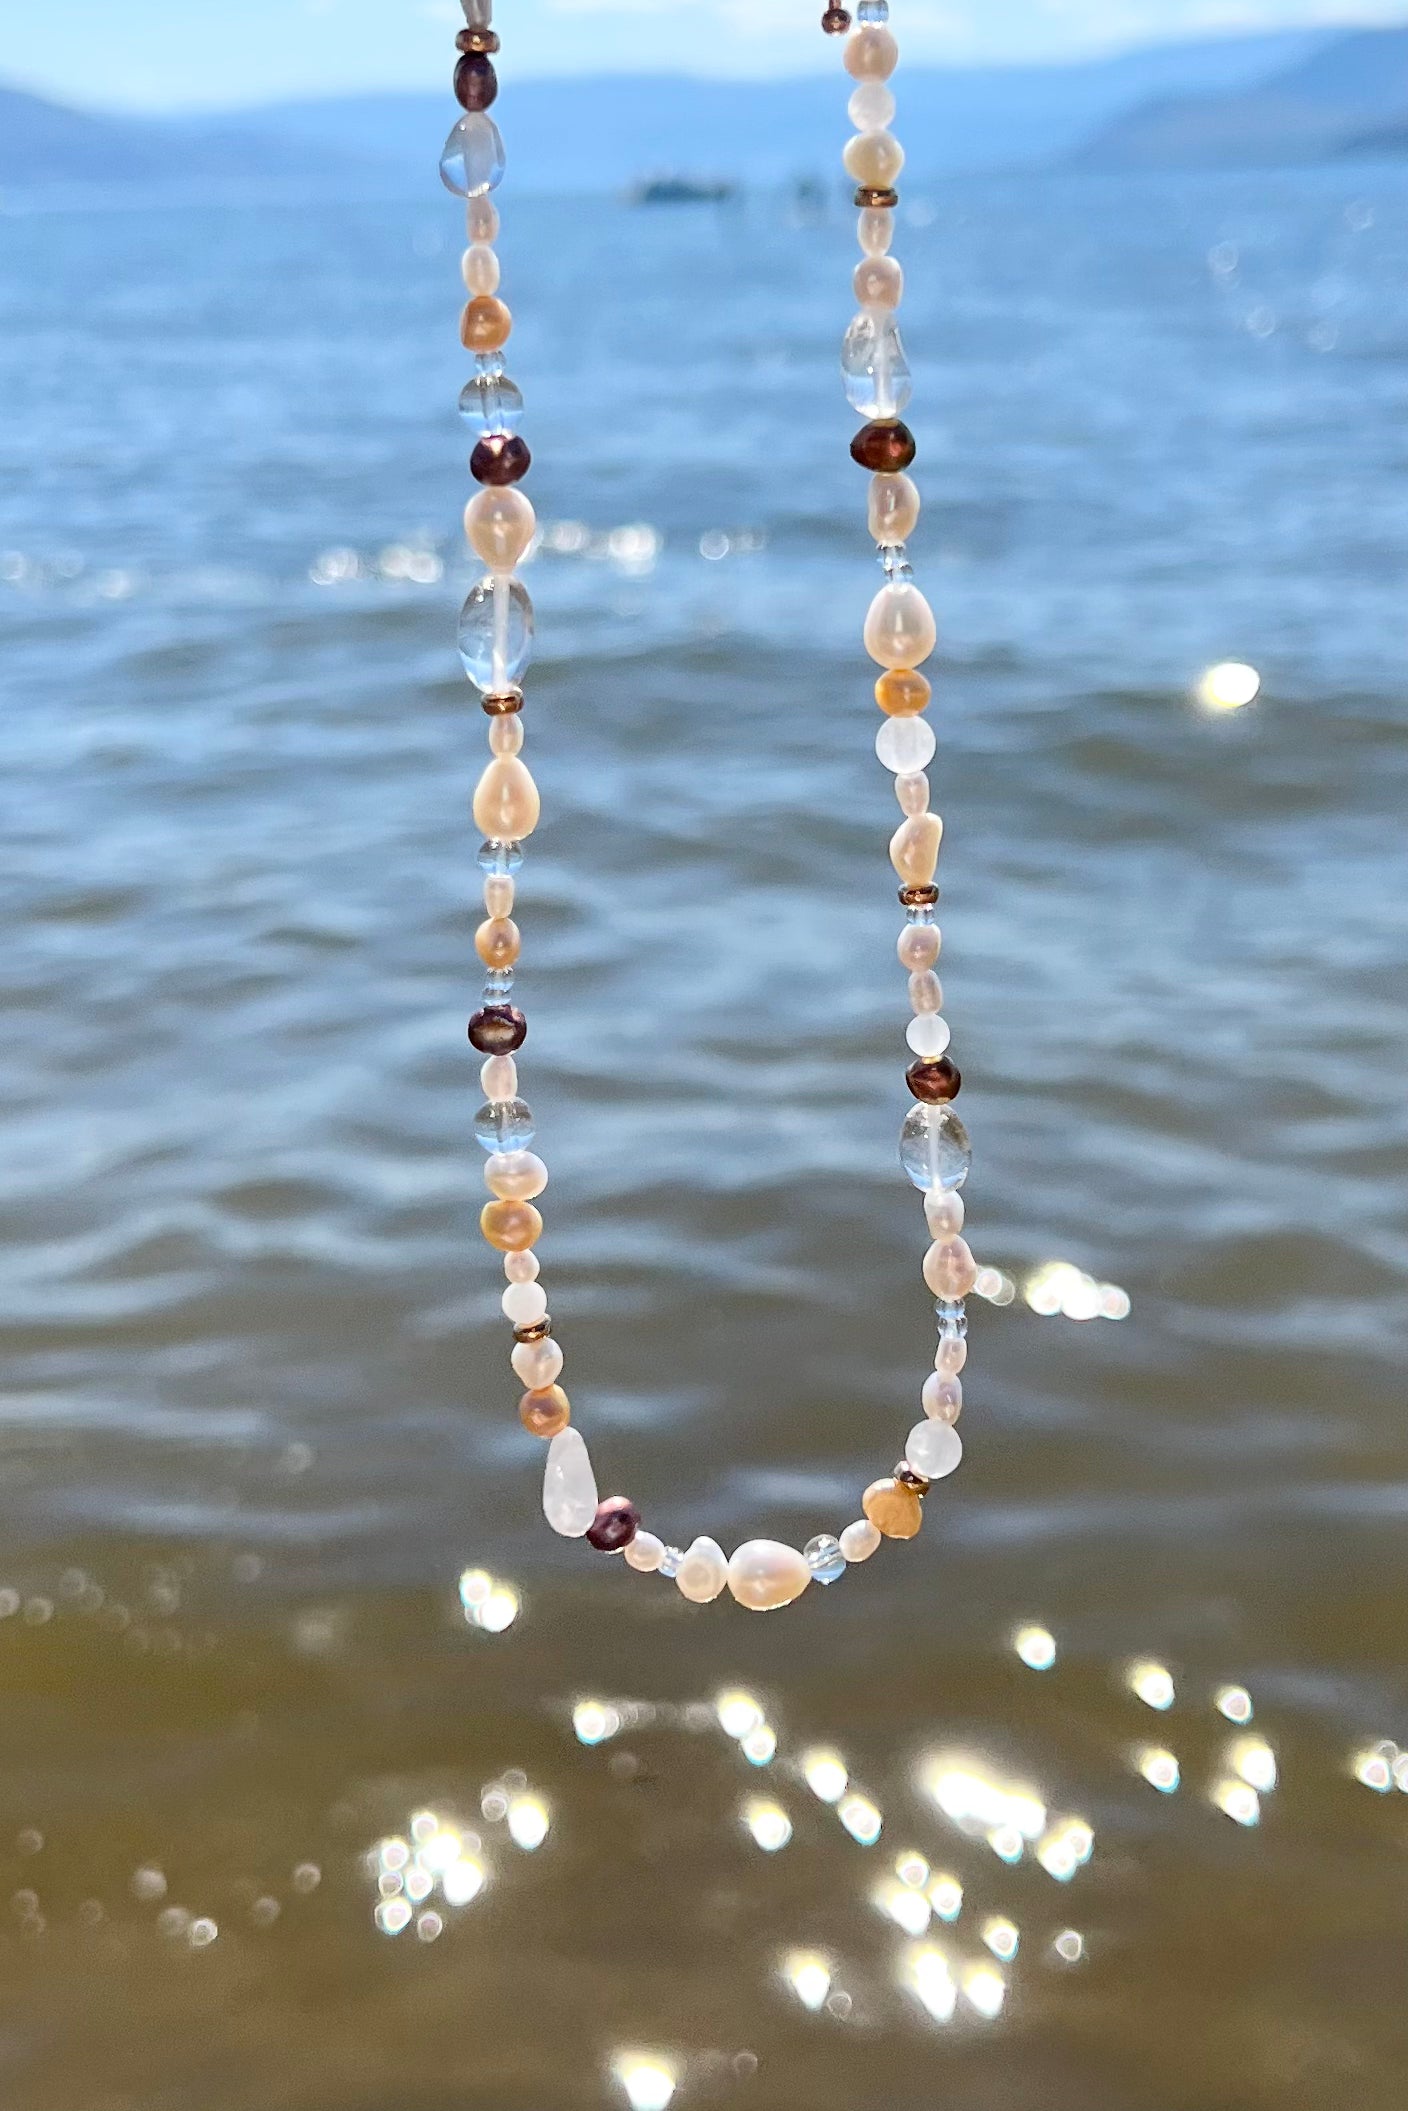 Nova necklace photographed at the beach, with the beach water background, showcasing how the necklace looks like in bright, direct sunlight.